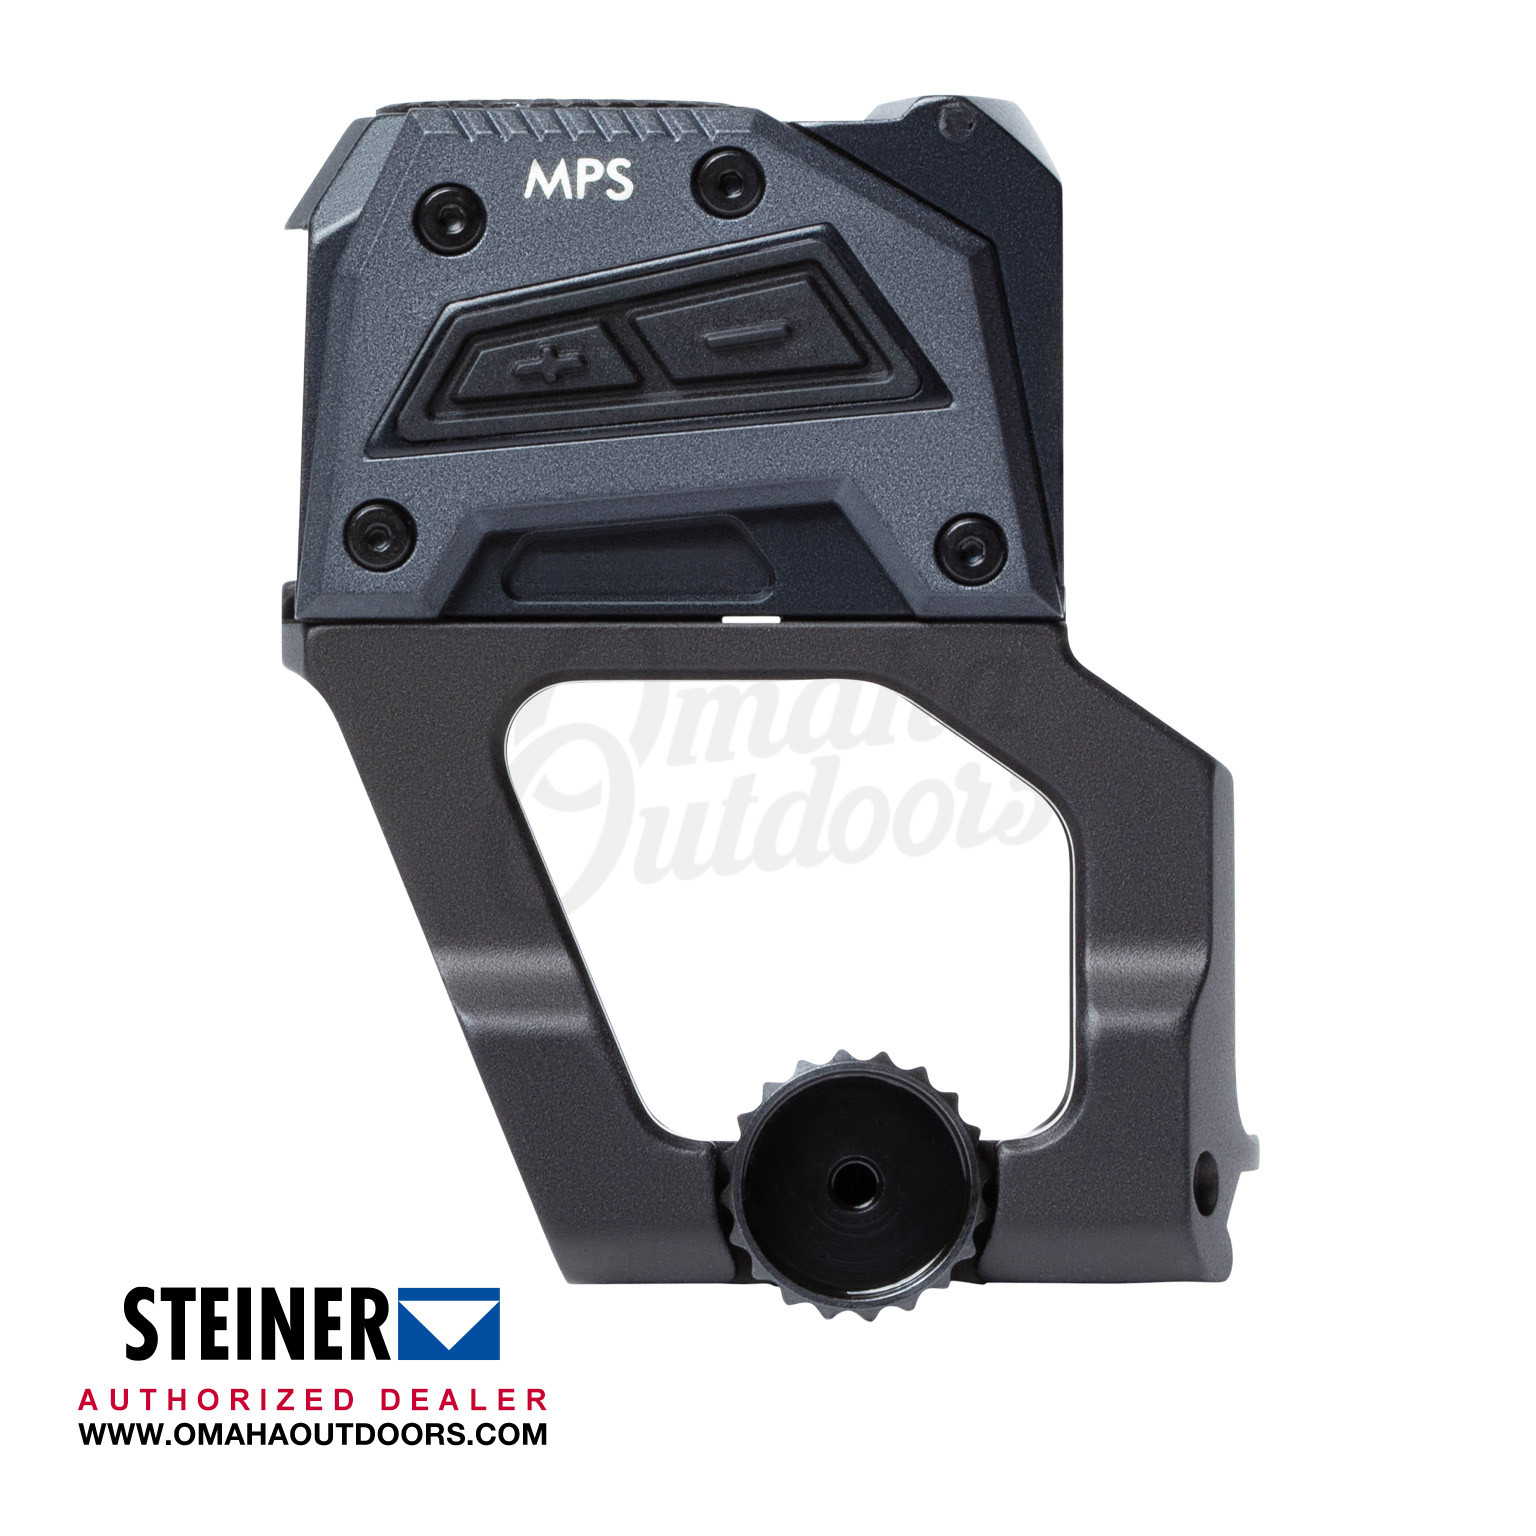 Steiner MPS Red Dot with SCALARWORKS LEAP 03 Mount 1.93 - Free